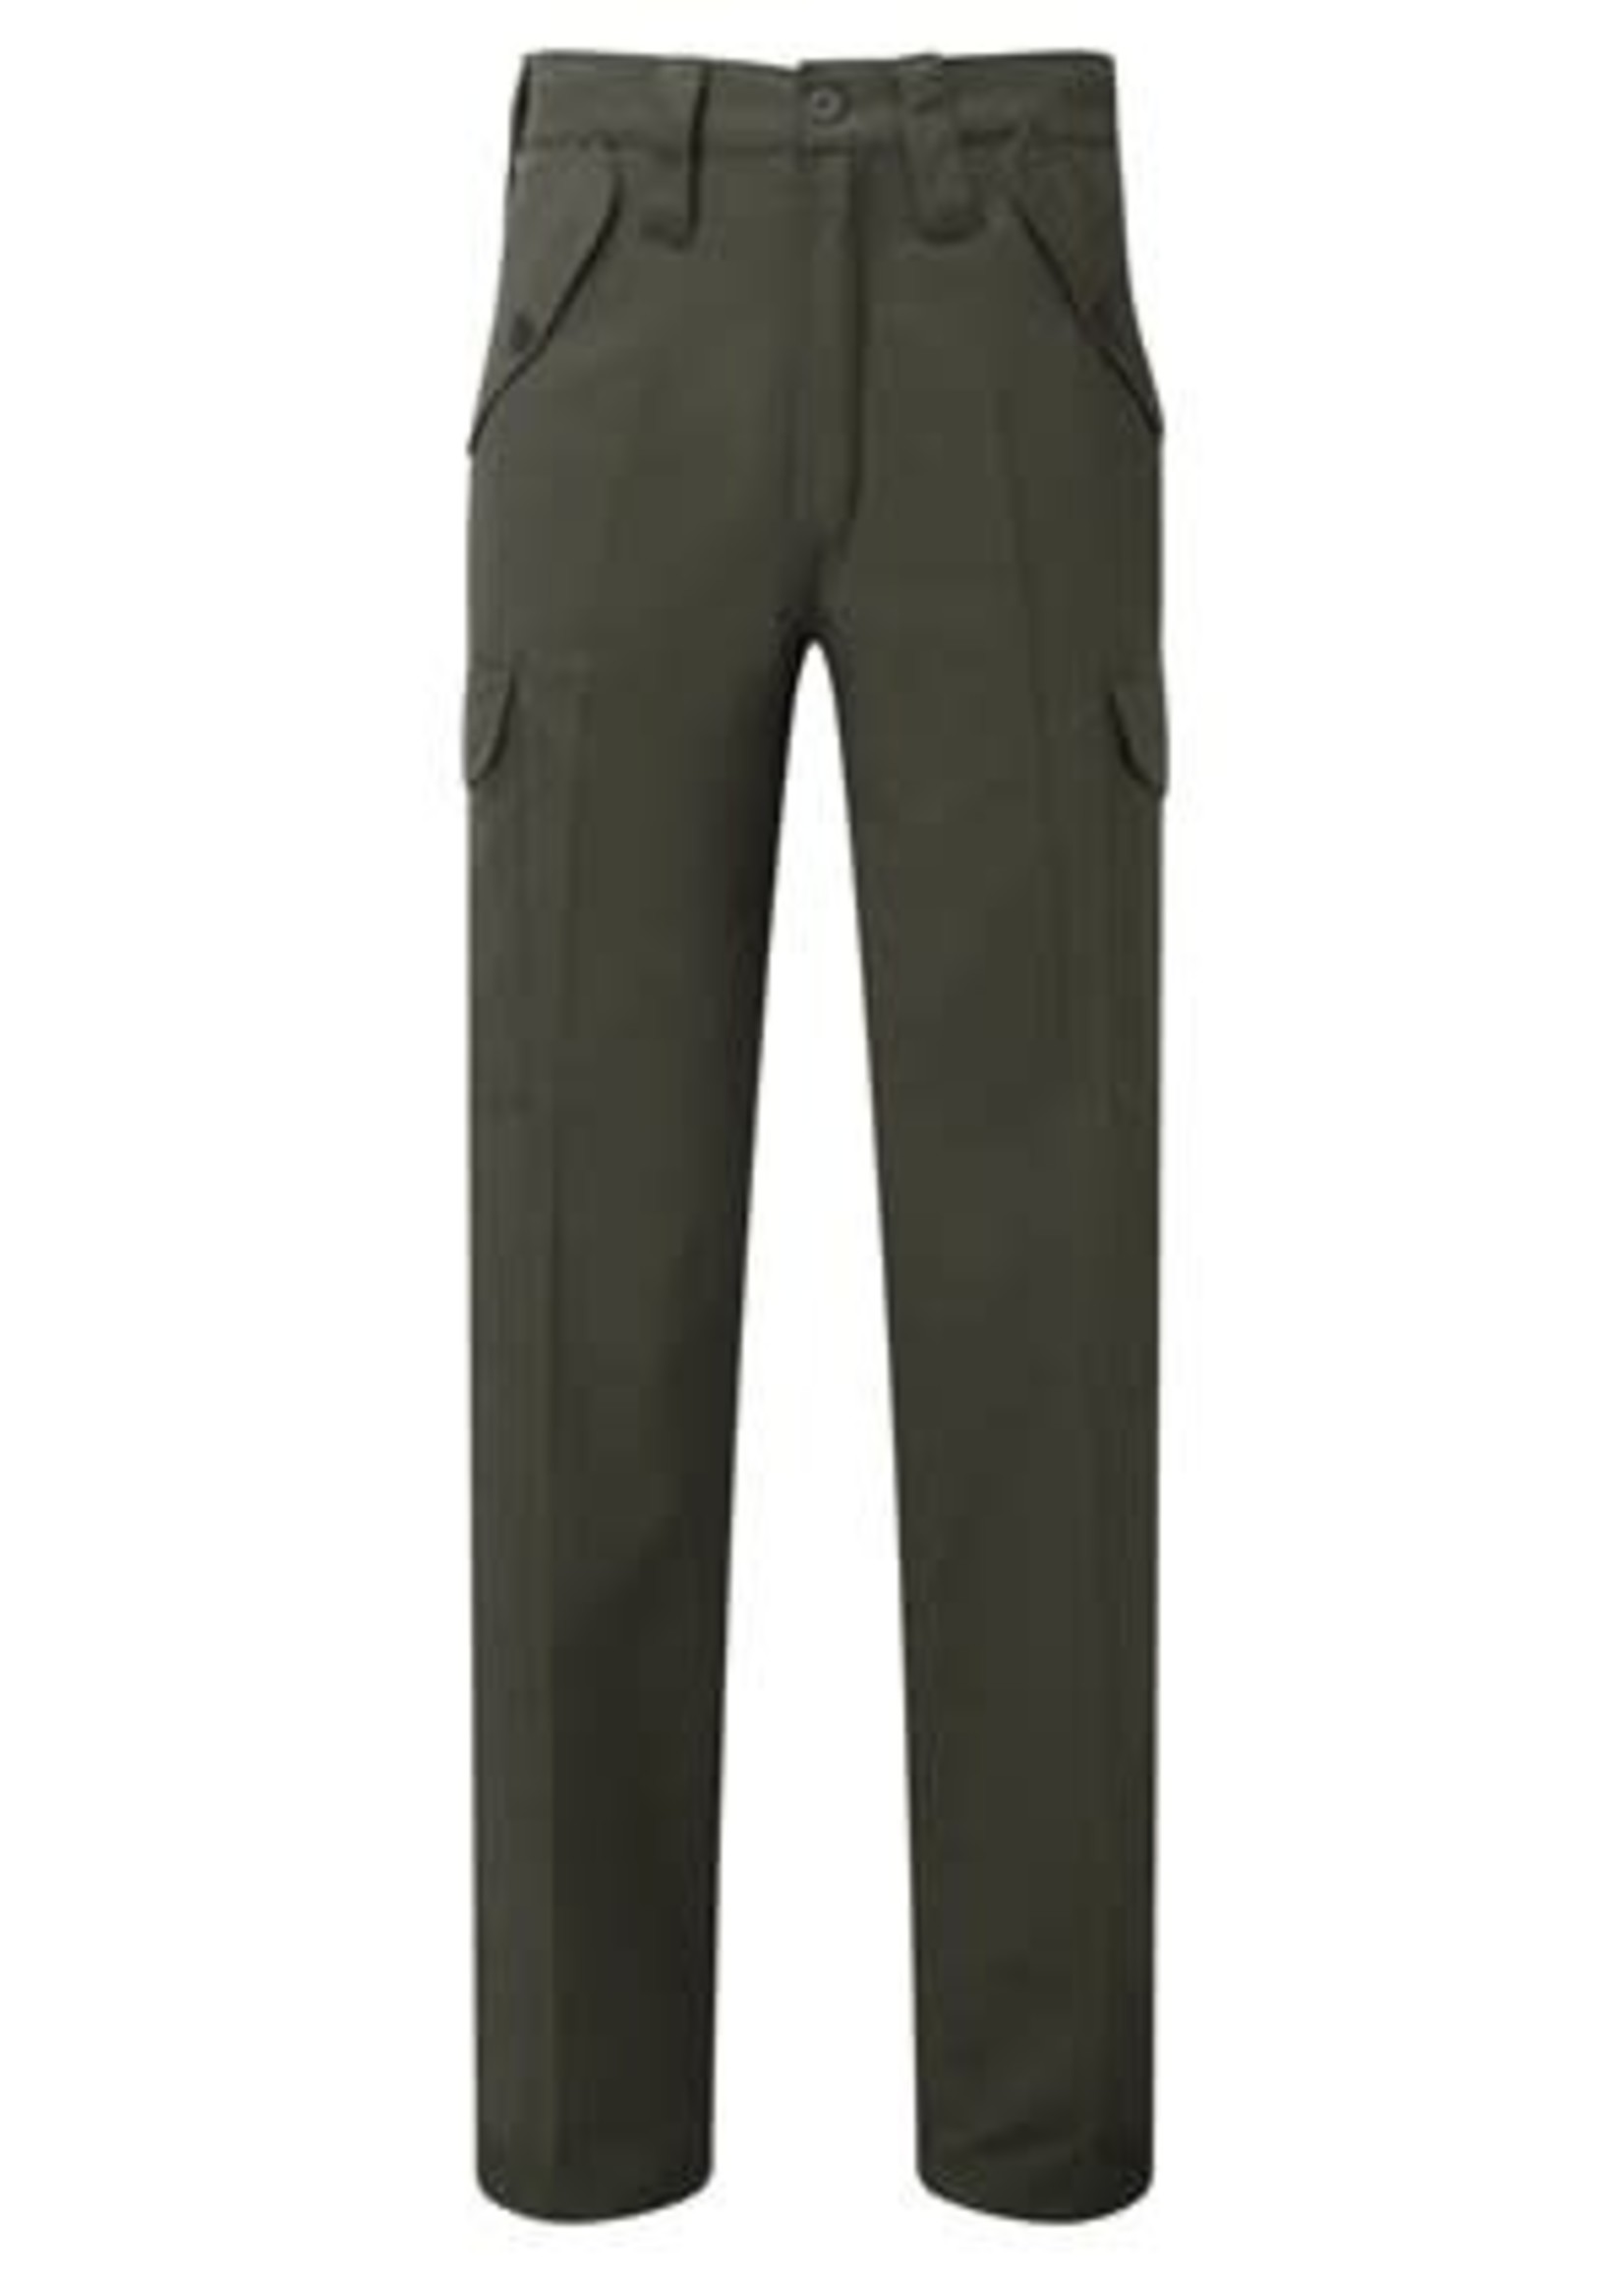 FORT Workwear Combat Trouser 901 Fort